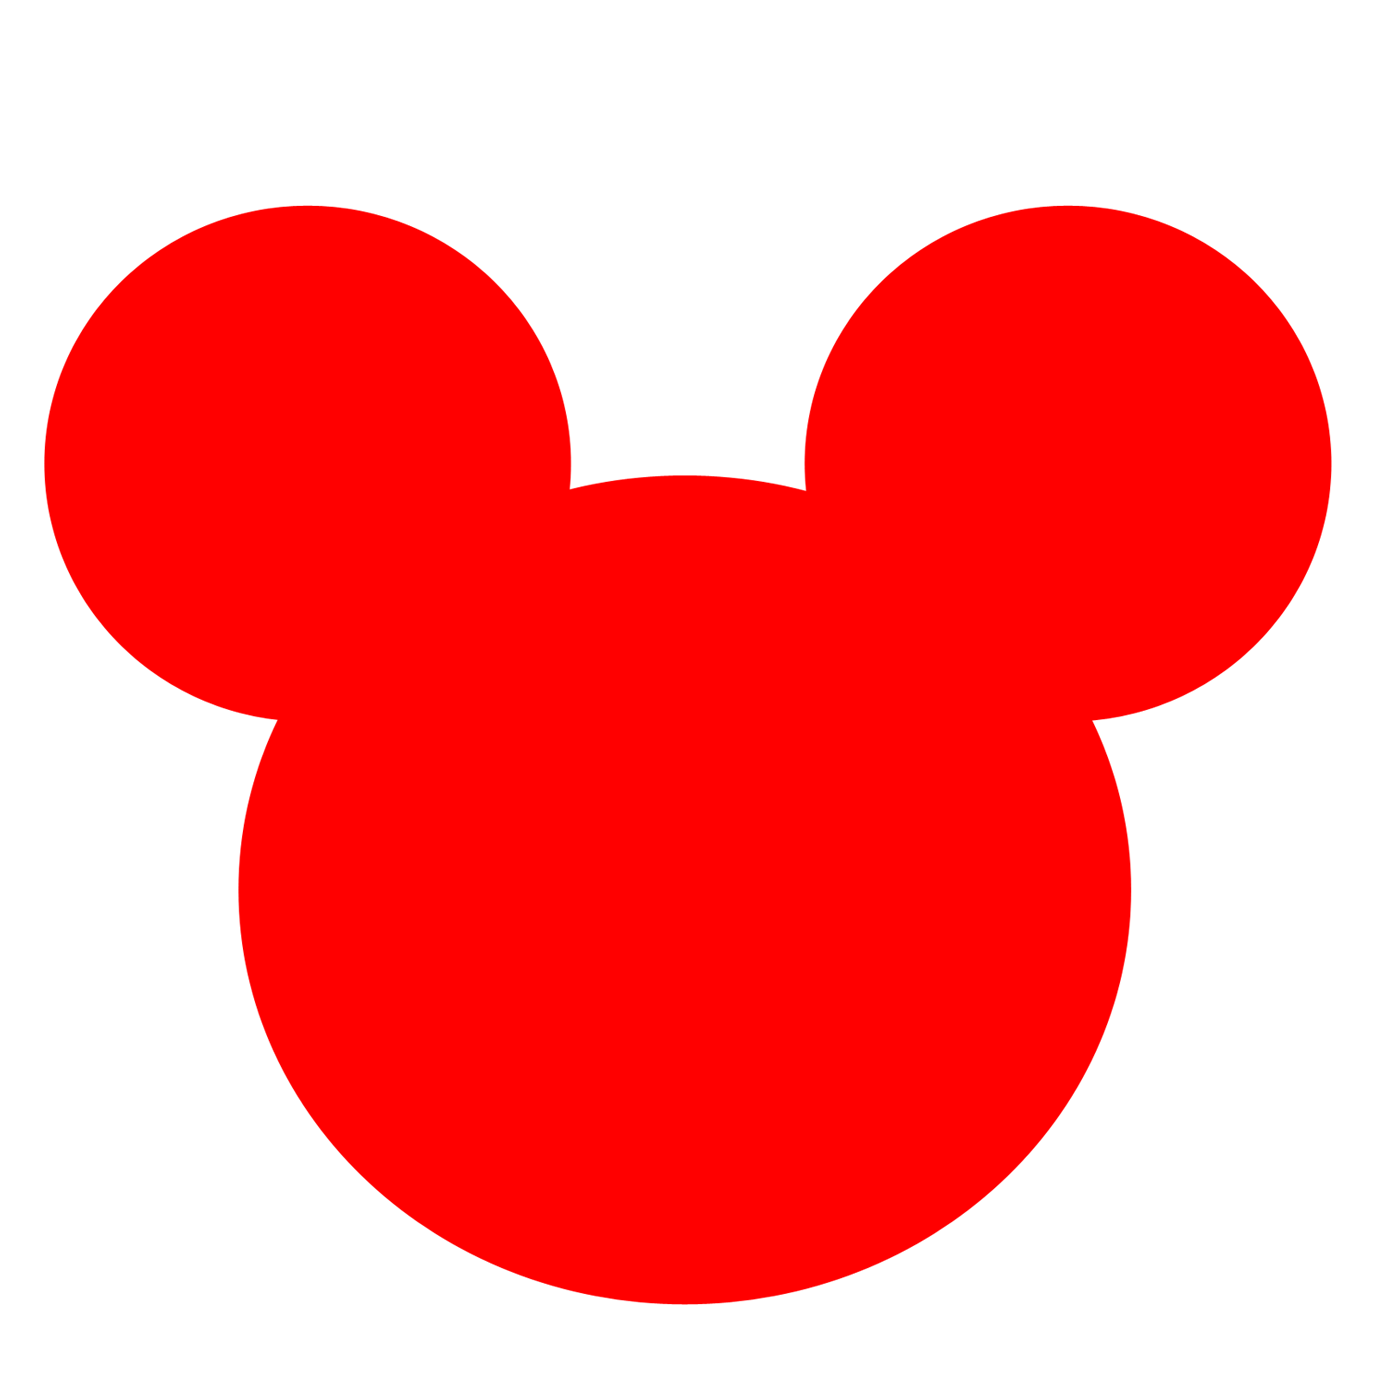 Mickey mouse head silhouette clipart